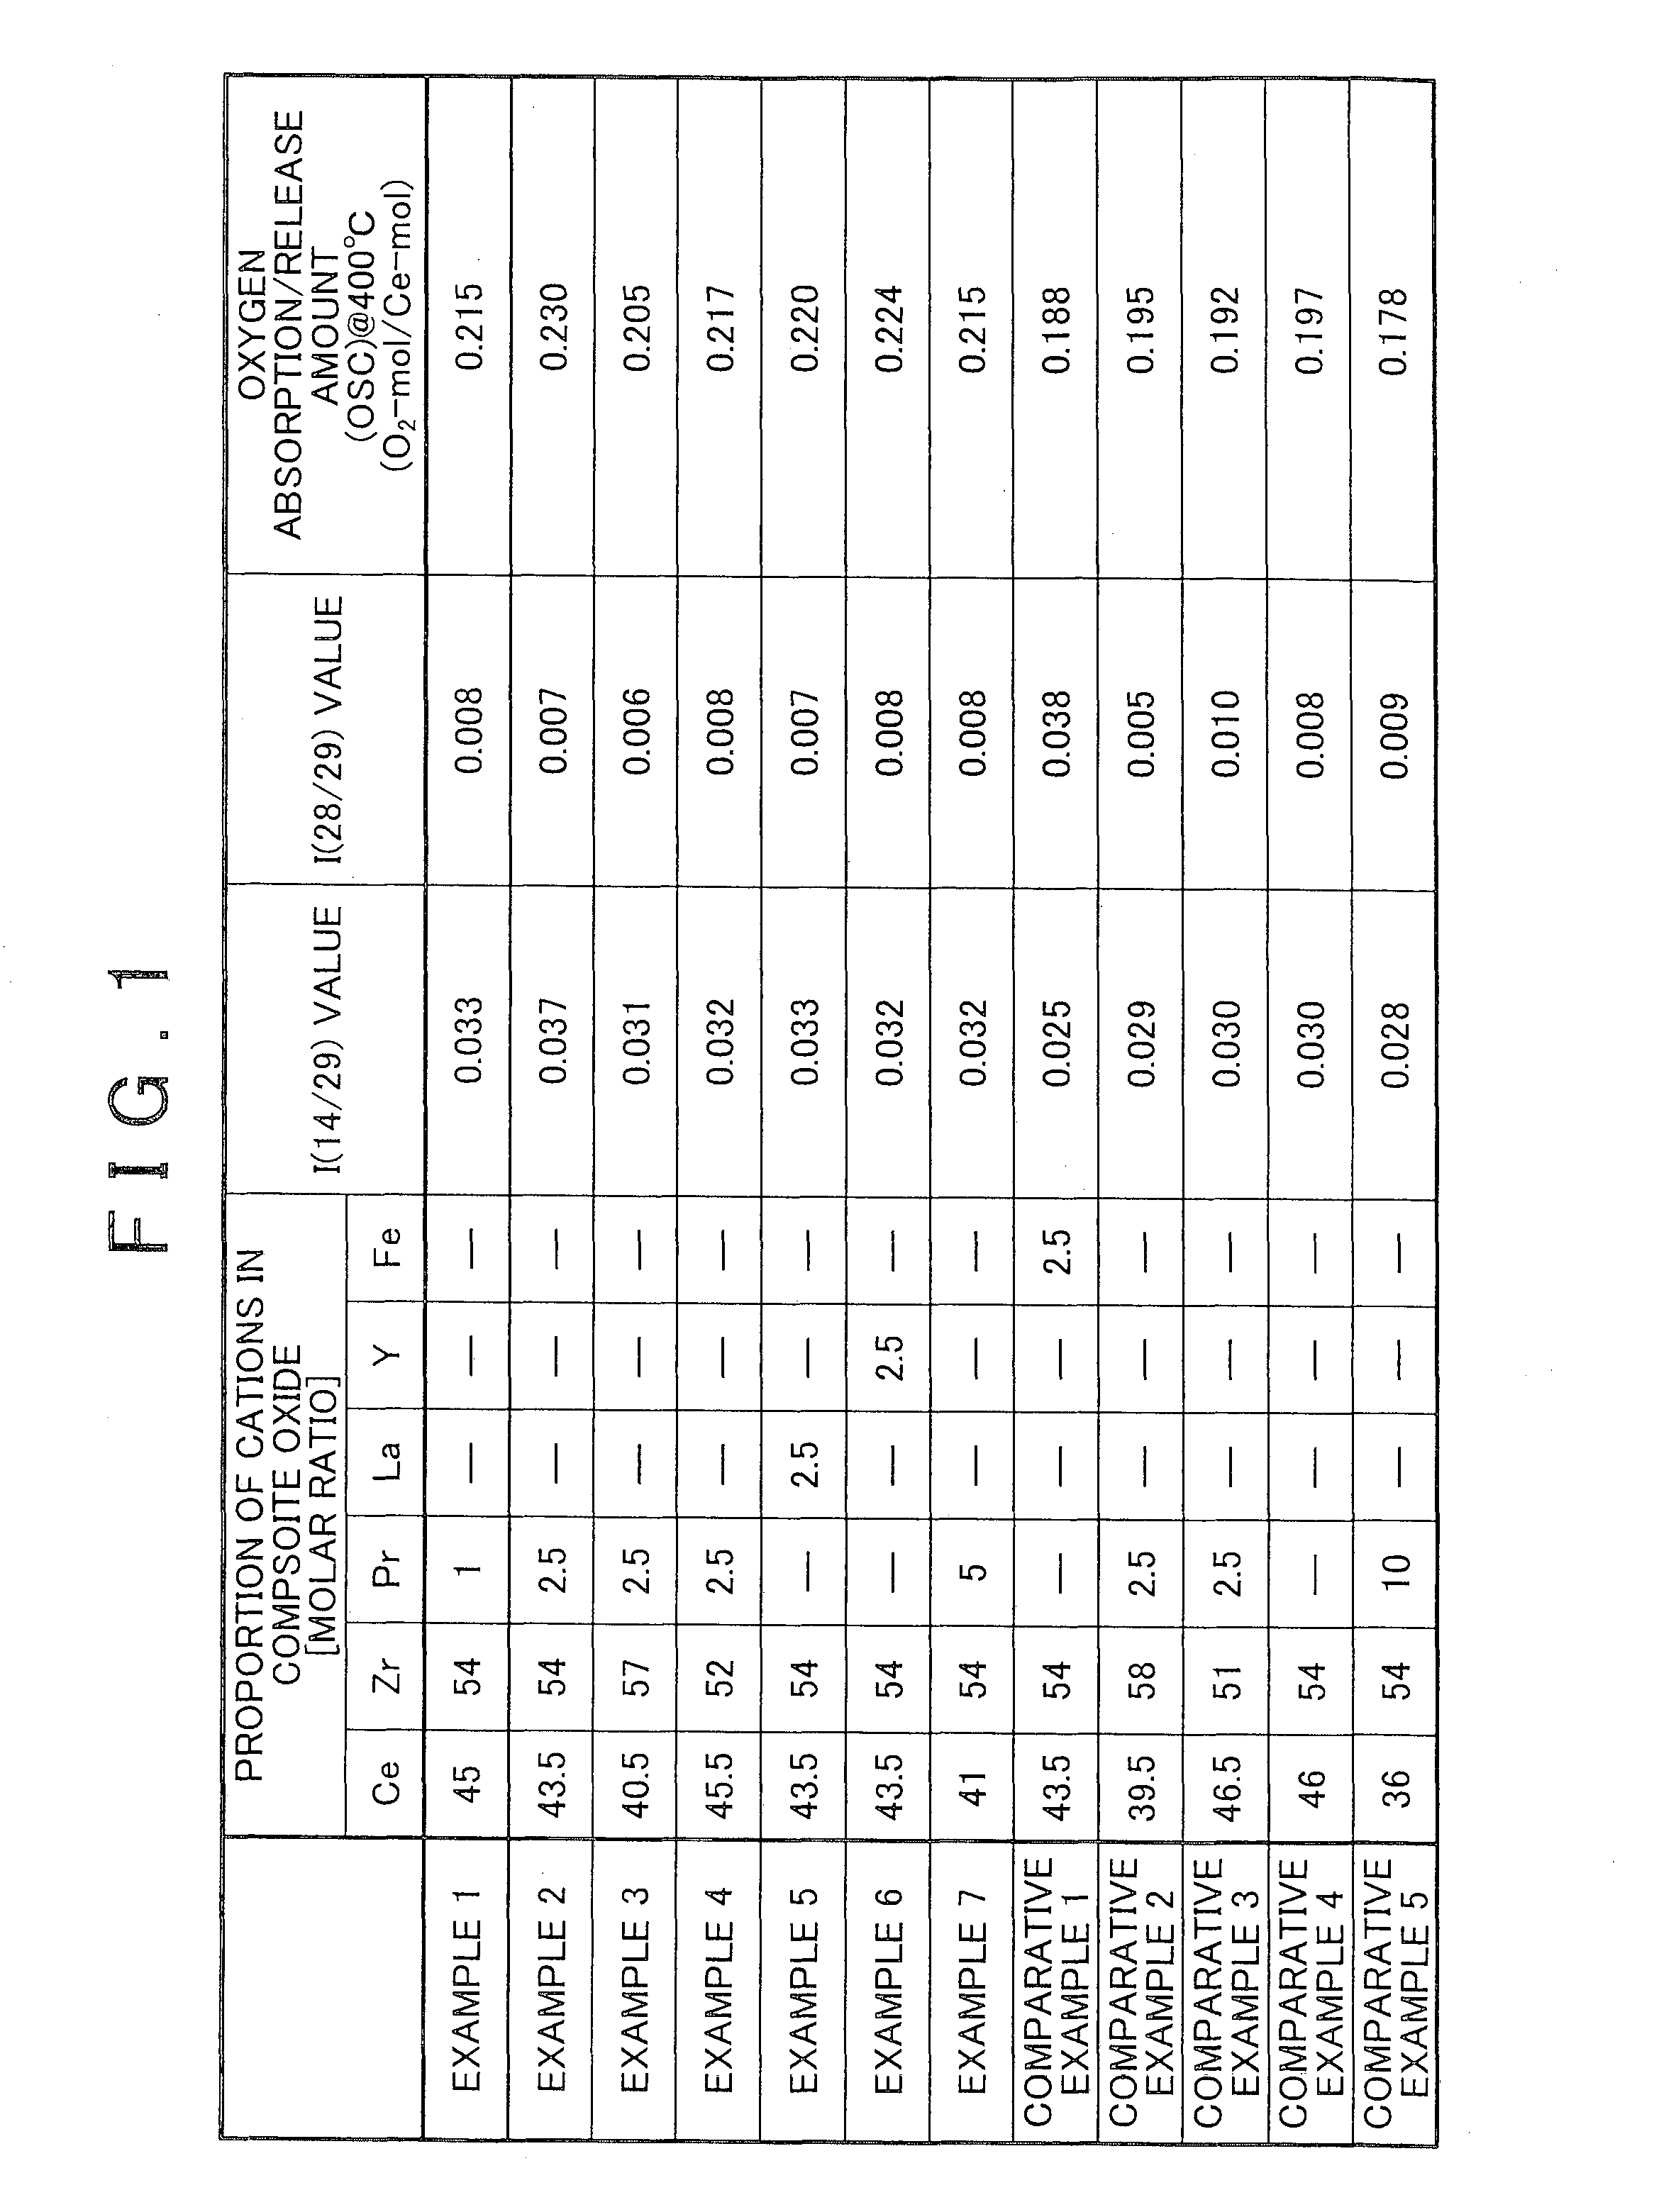 Ceria-zirconia-based composite oxide and method for producing same, and catalyst for exhaust gas purification including ceria-zirconia-based composite oxide